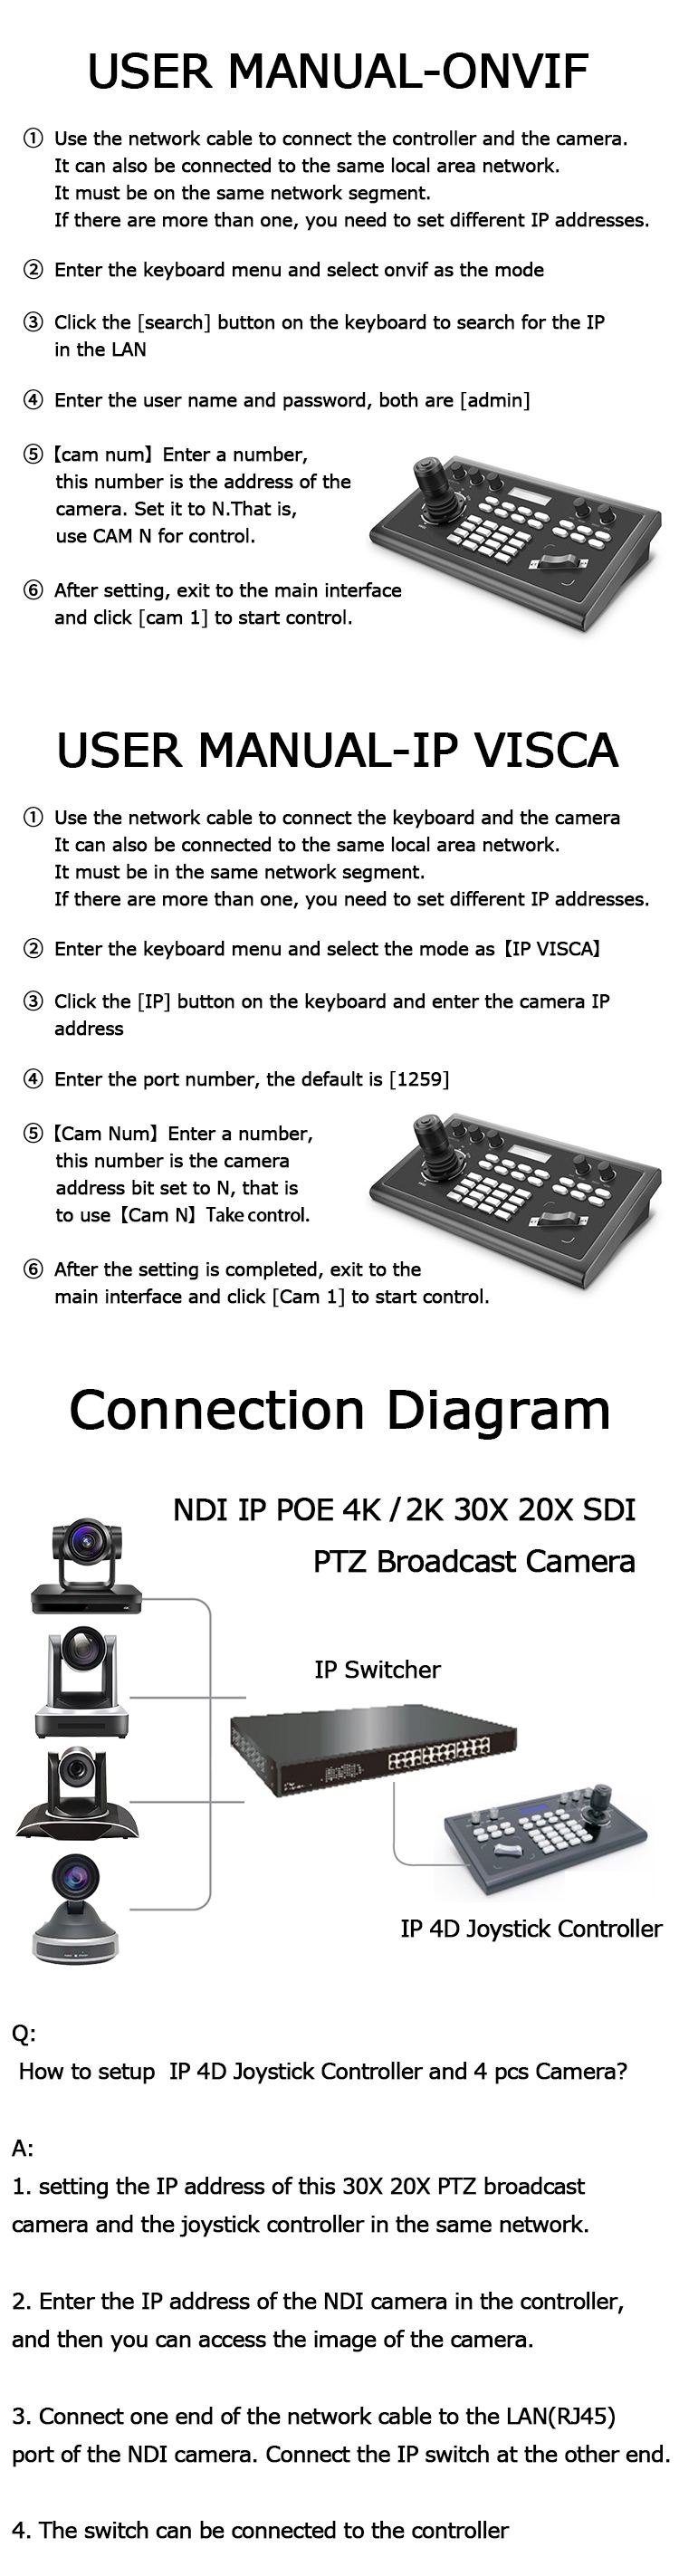 D50 Broadcast IP 4D Joystick Controller with RJ45 Supports Onvif RTMP RTSP Vmix Wirecast Visca PElCO-D/P for 255 cameras top